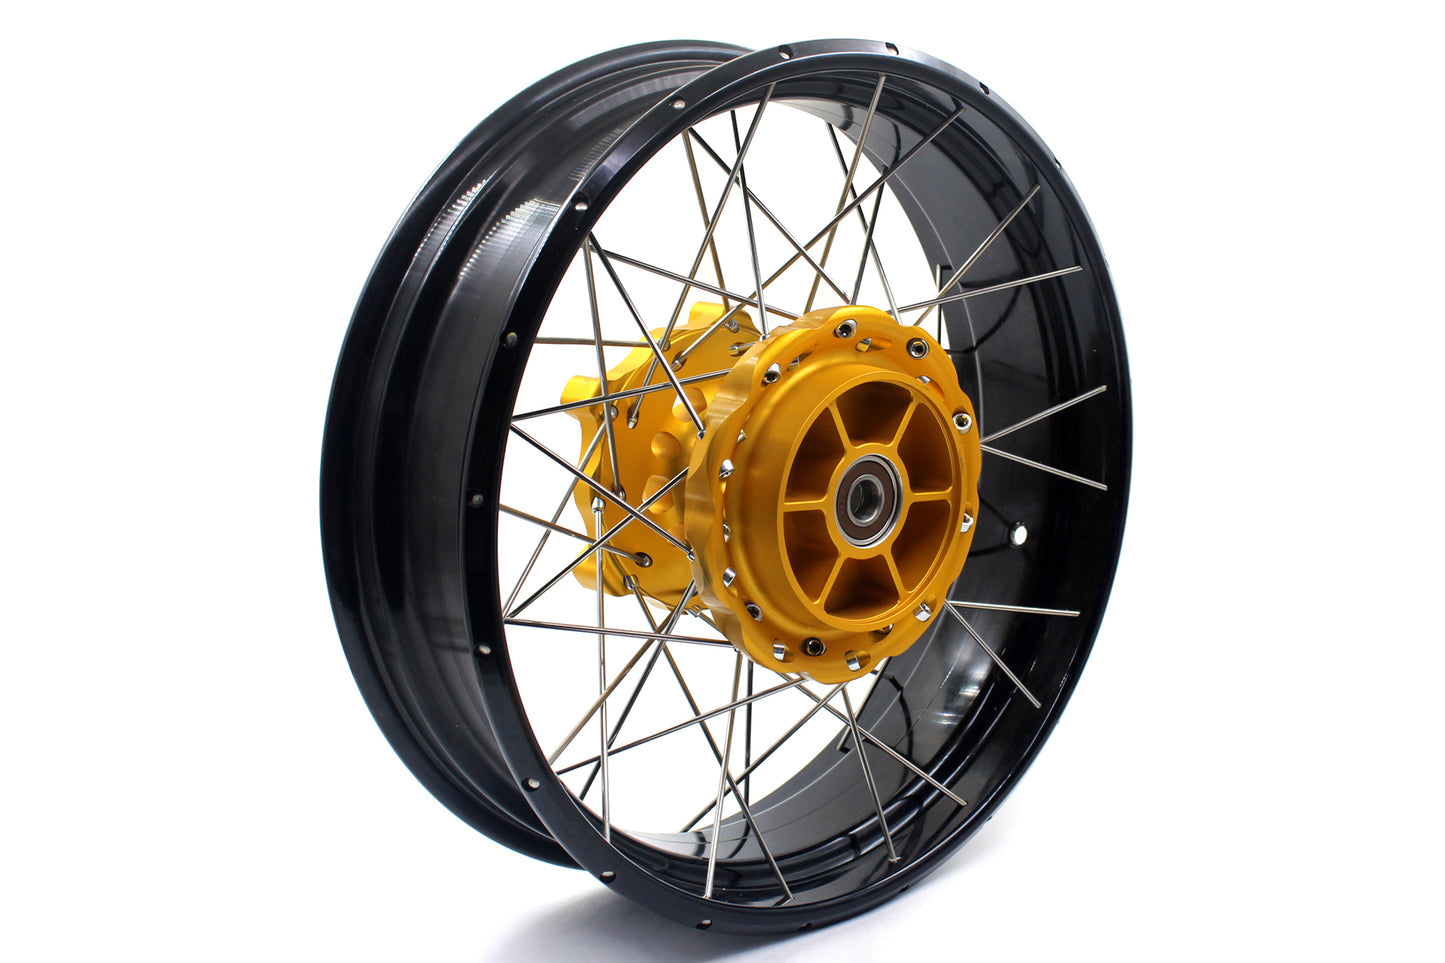 VMX-Racing 2.15*21 & 4.25*17 Tubeless Wheels Compatible with BMW F800GS / Adventure 2008-2020